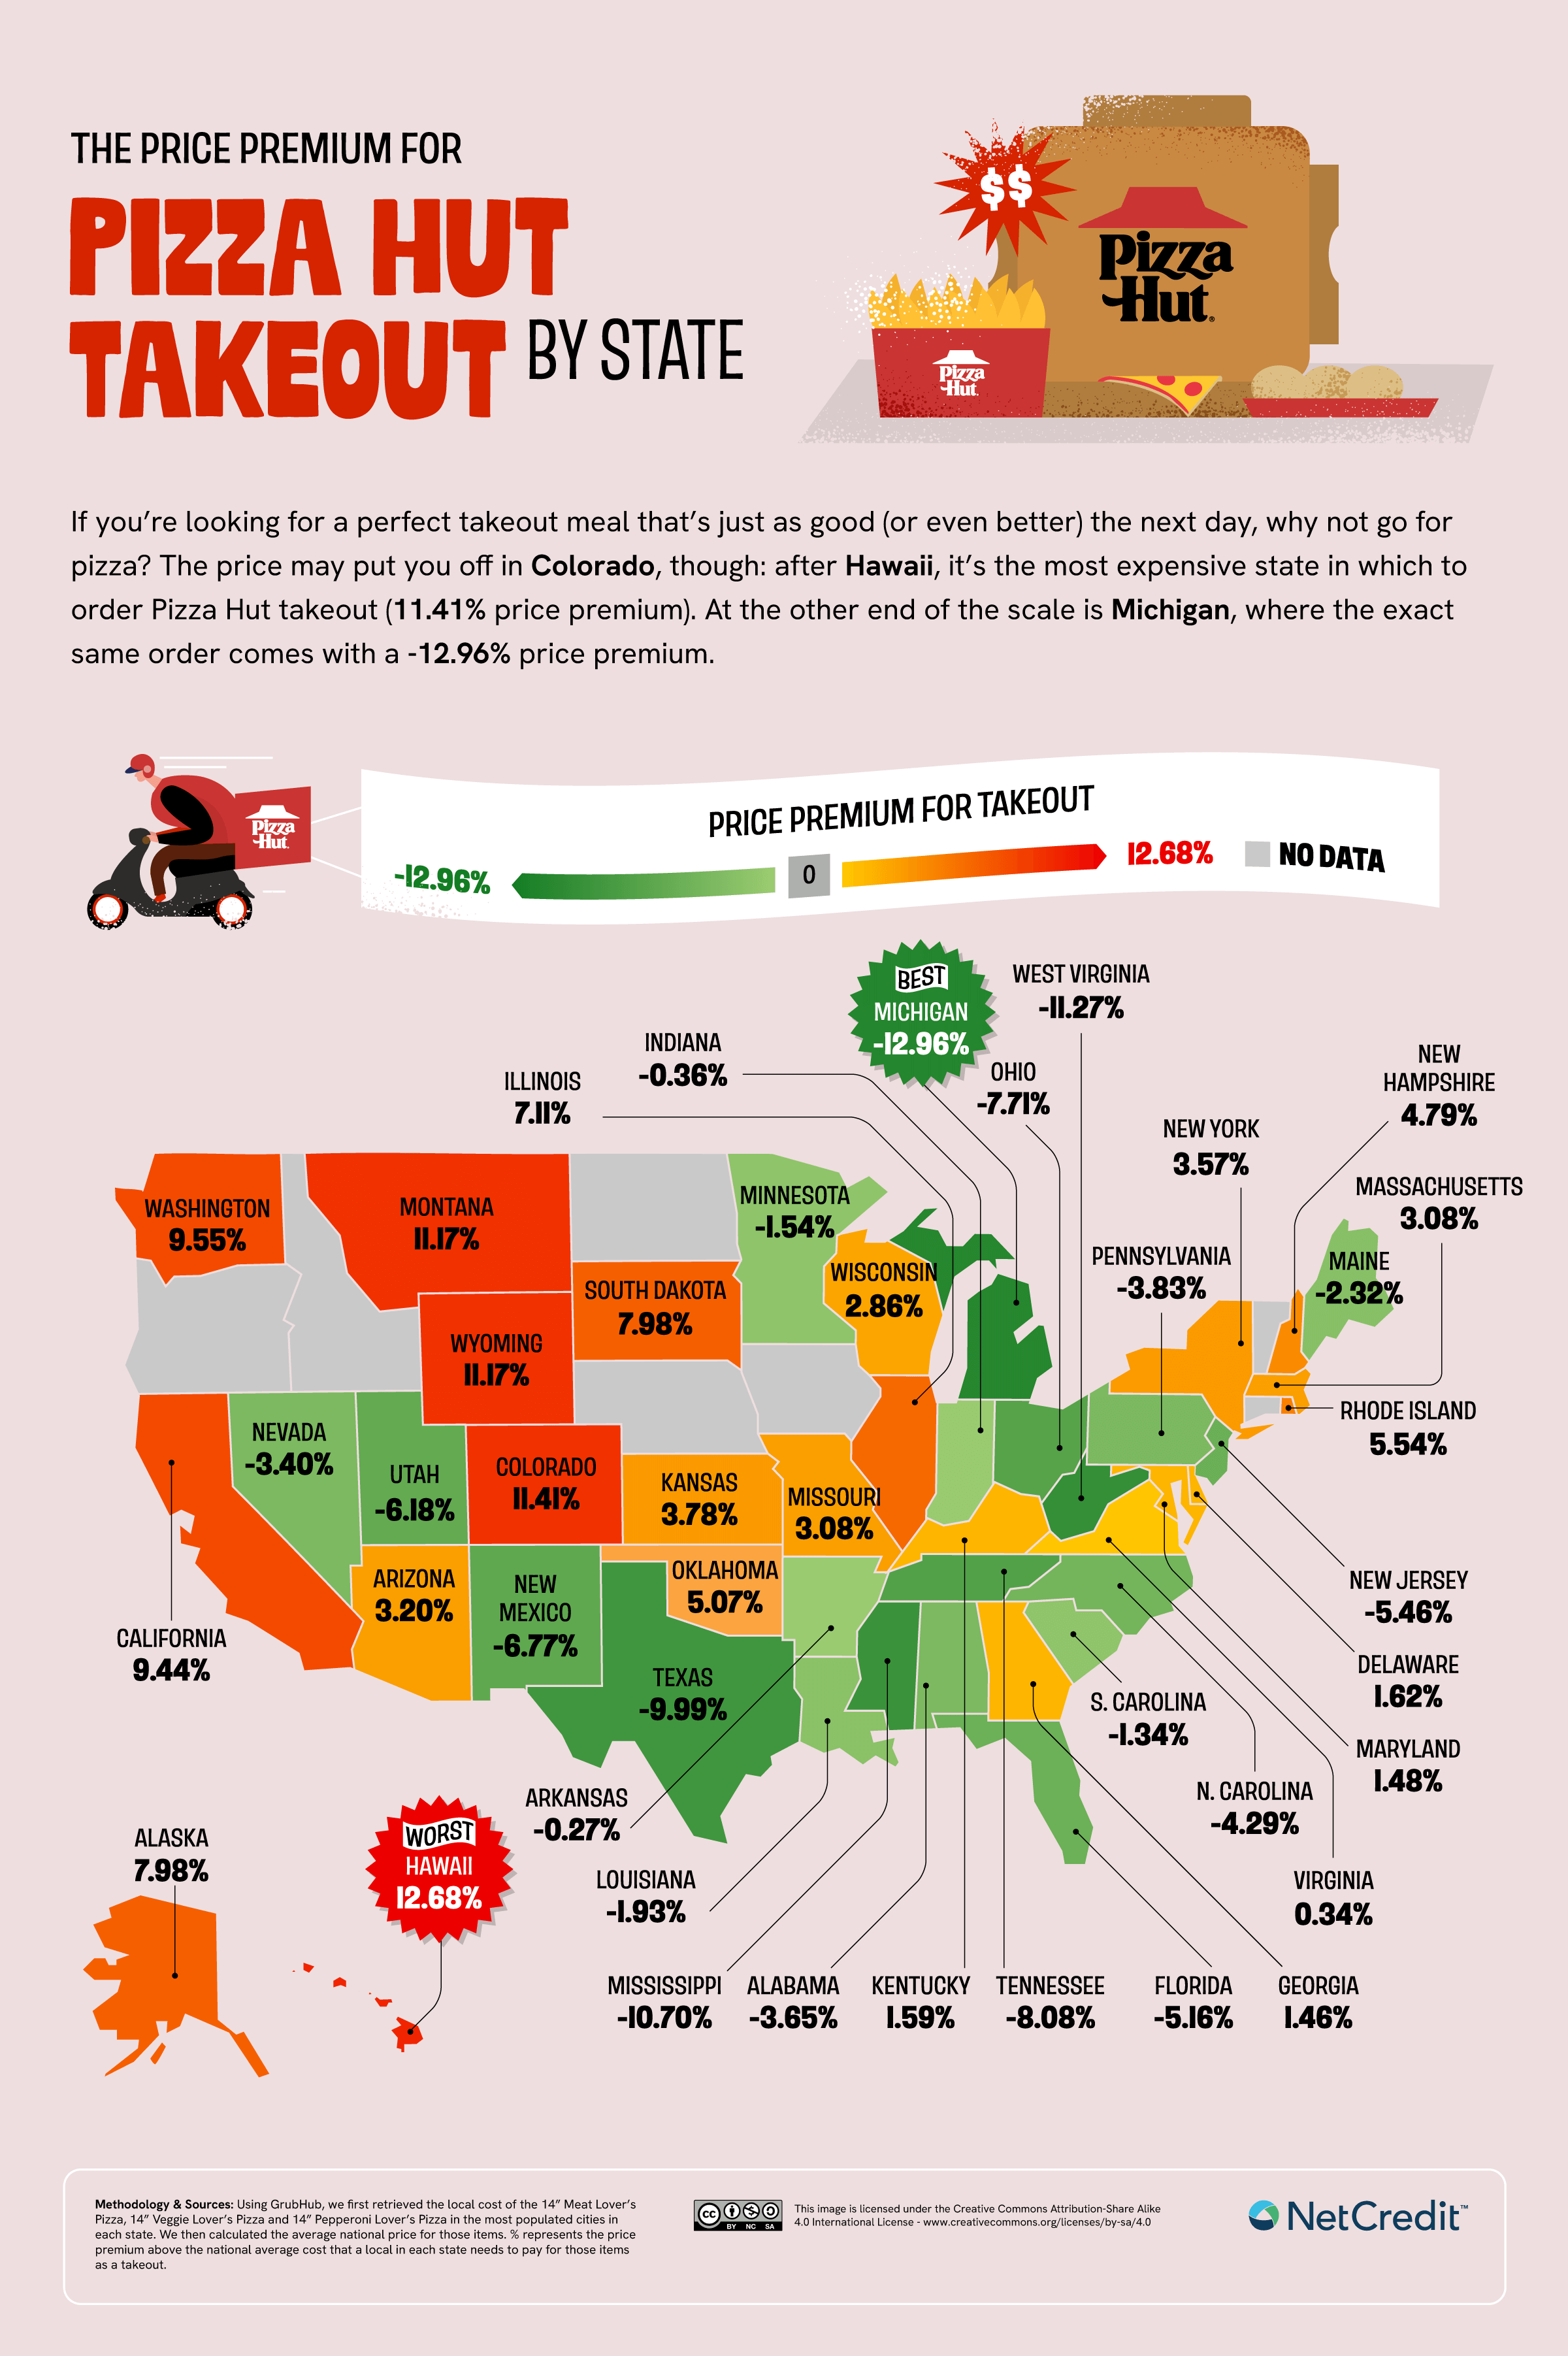 Infographic of price premium for Pizza Hut takeout by state.